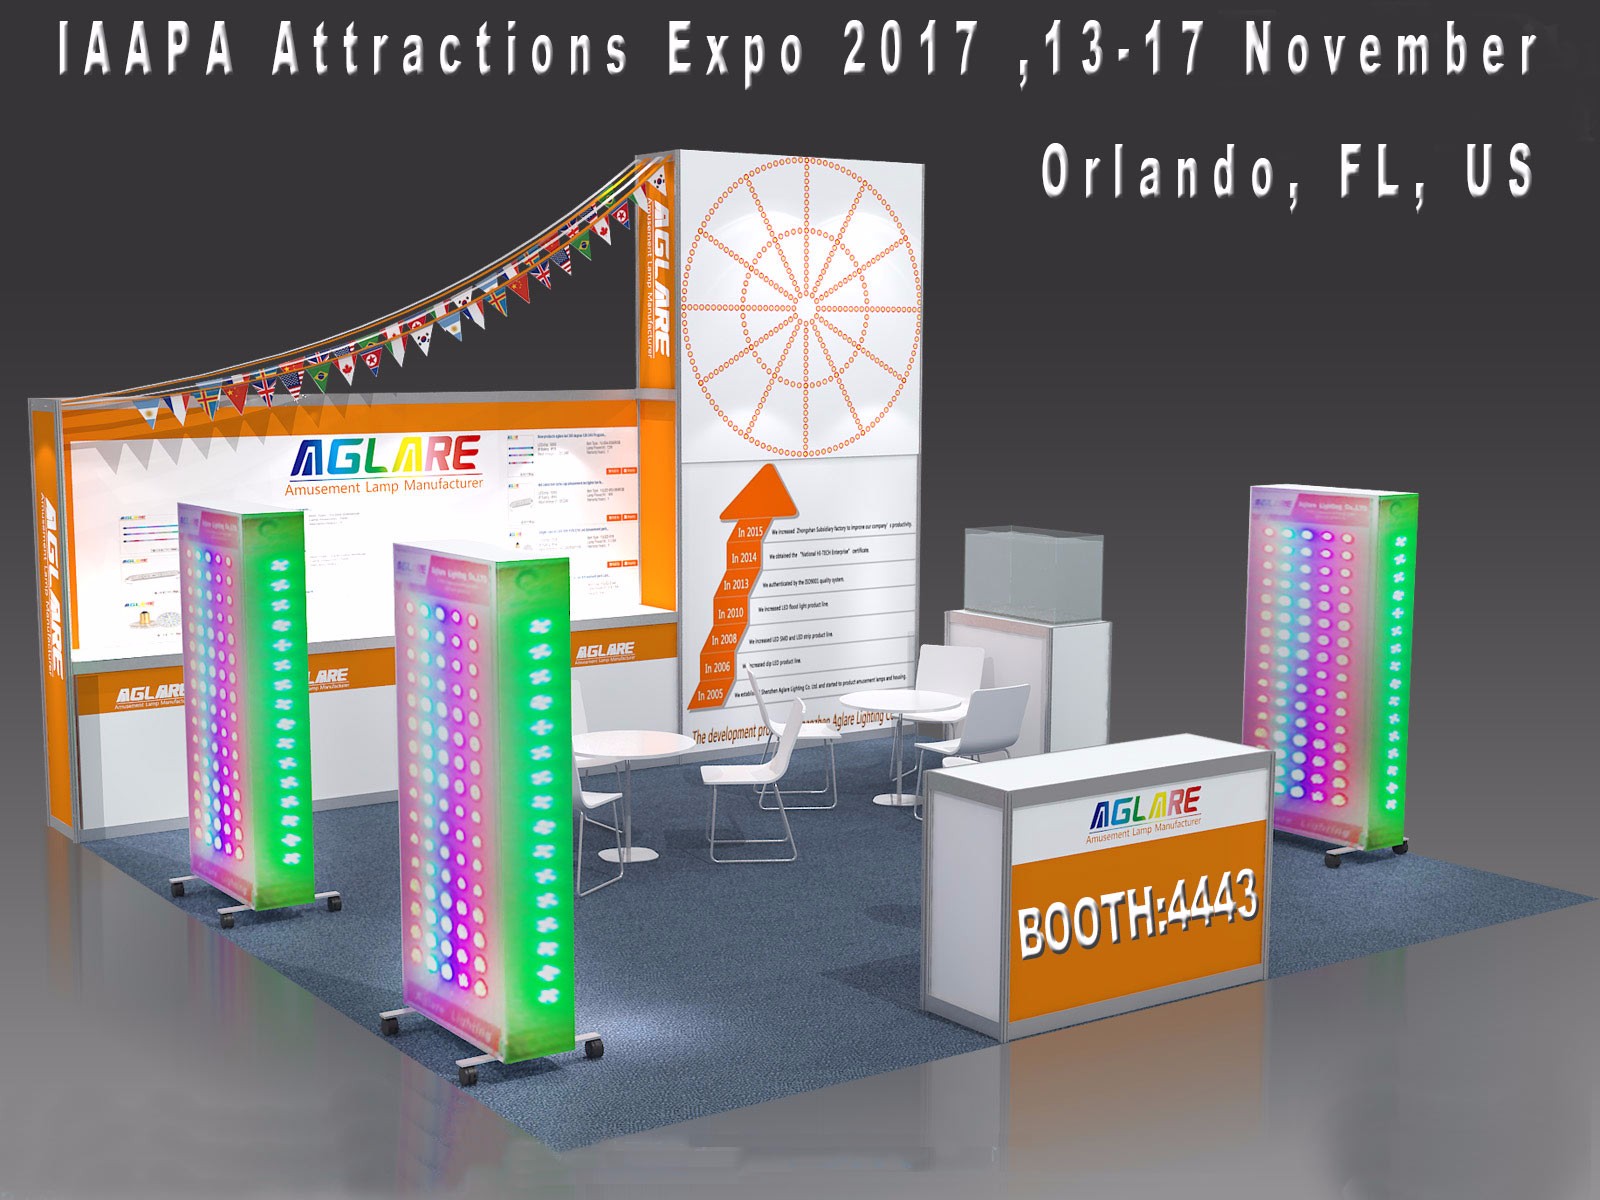 Aglare Lighting to Exhibit at the 2017 IAAPA Attractions Expo